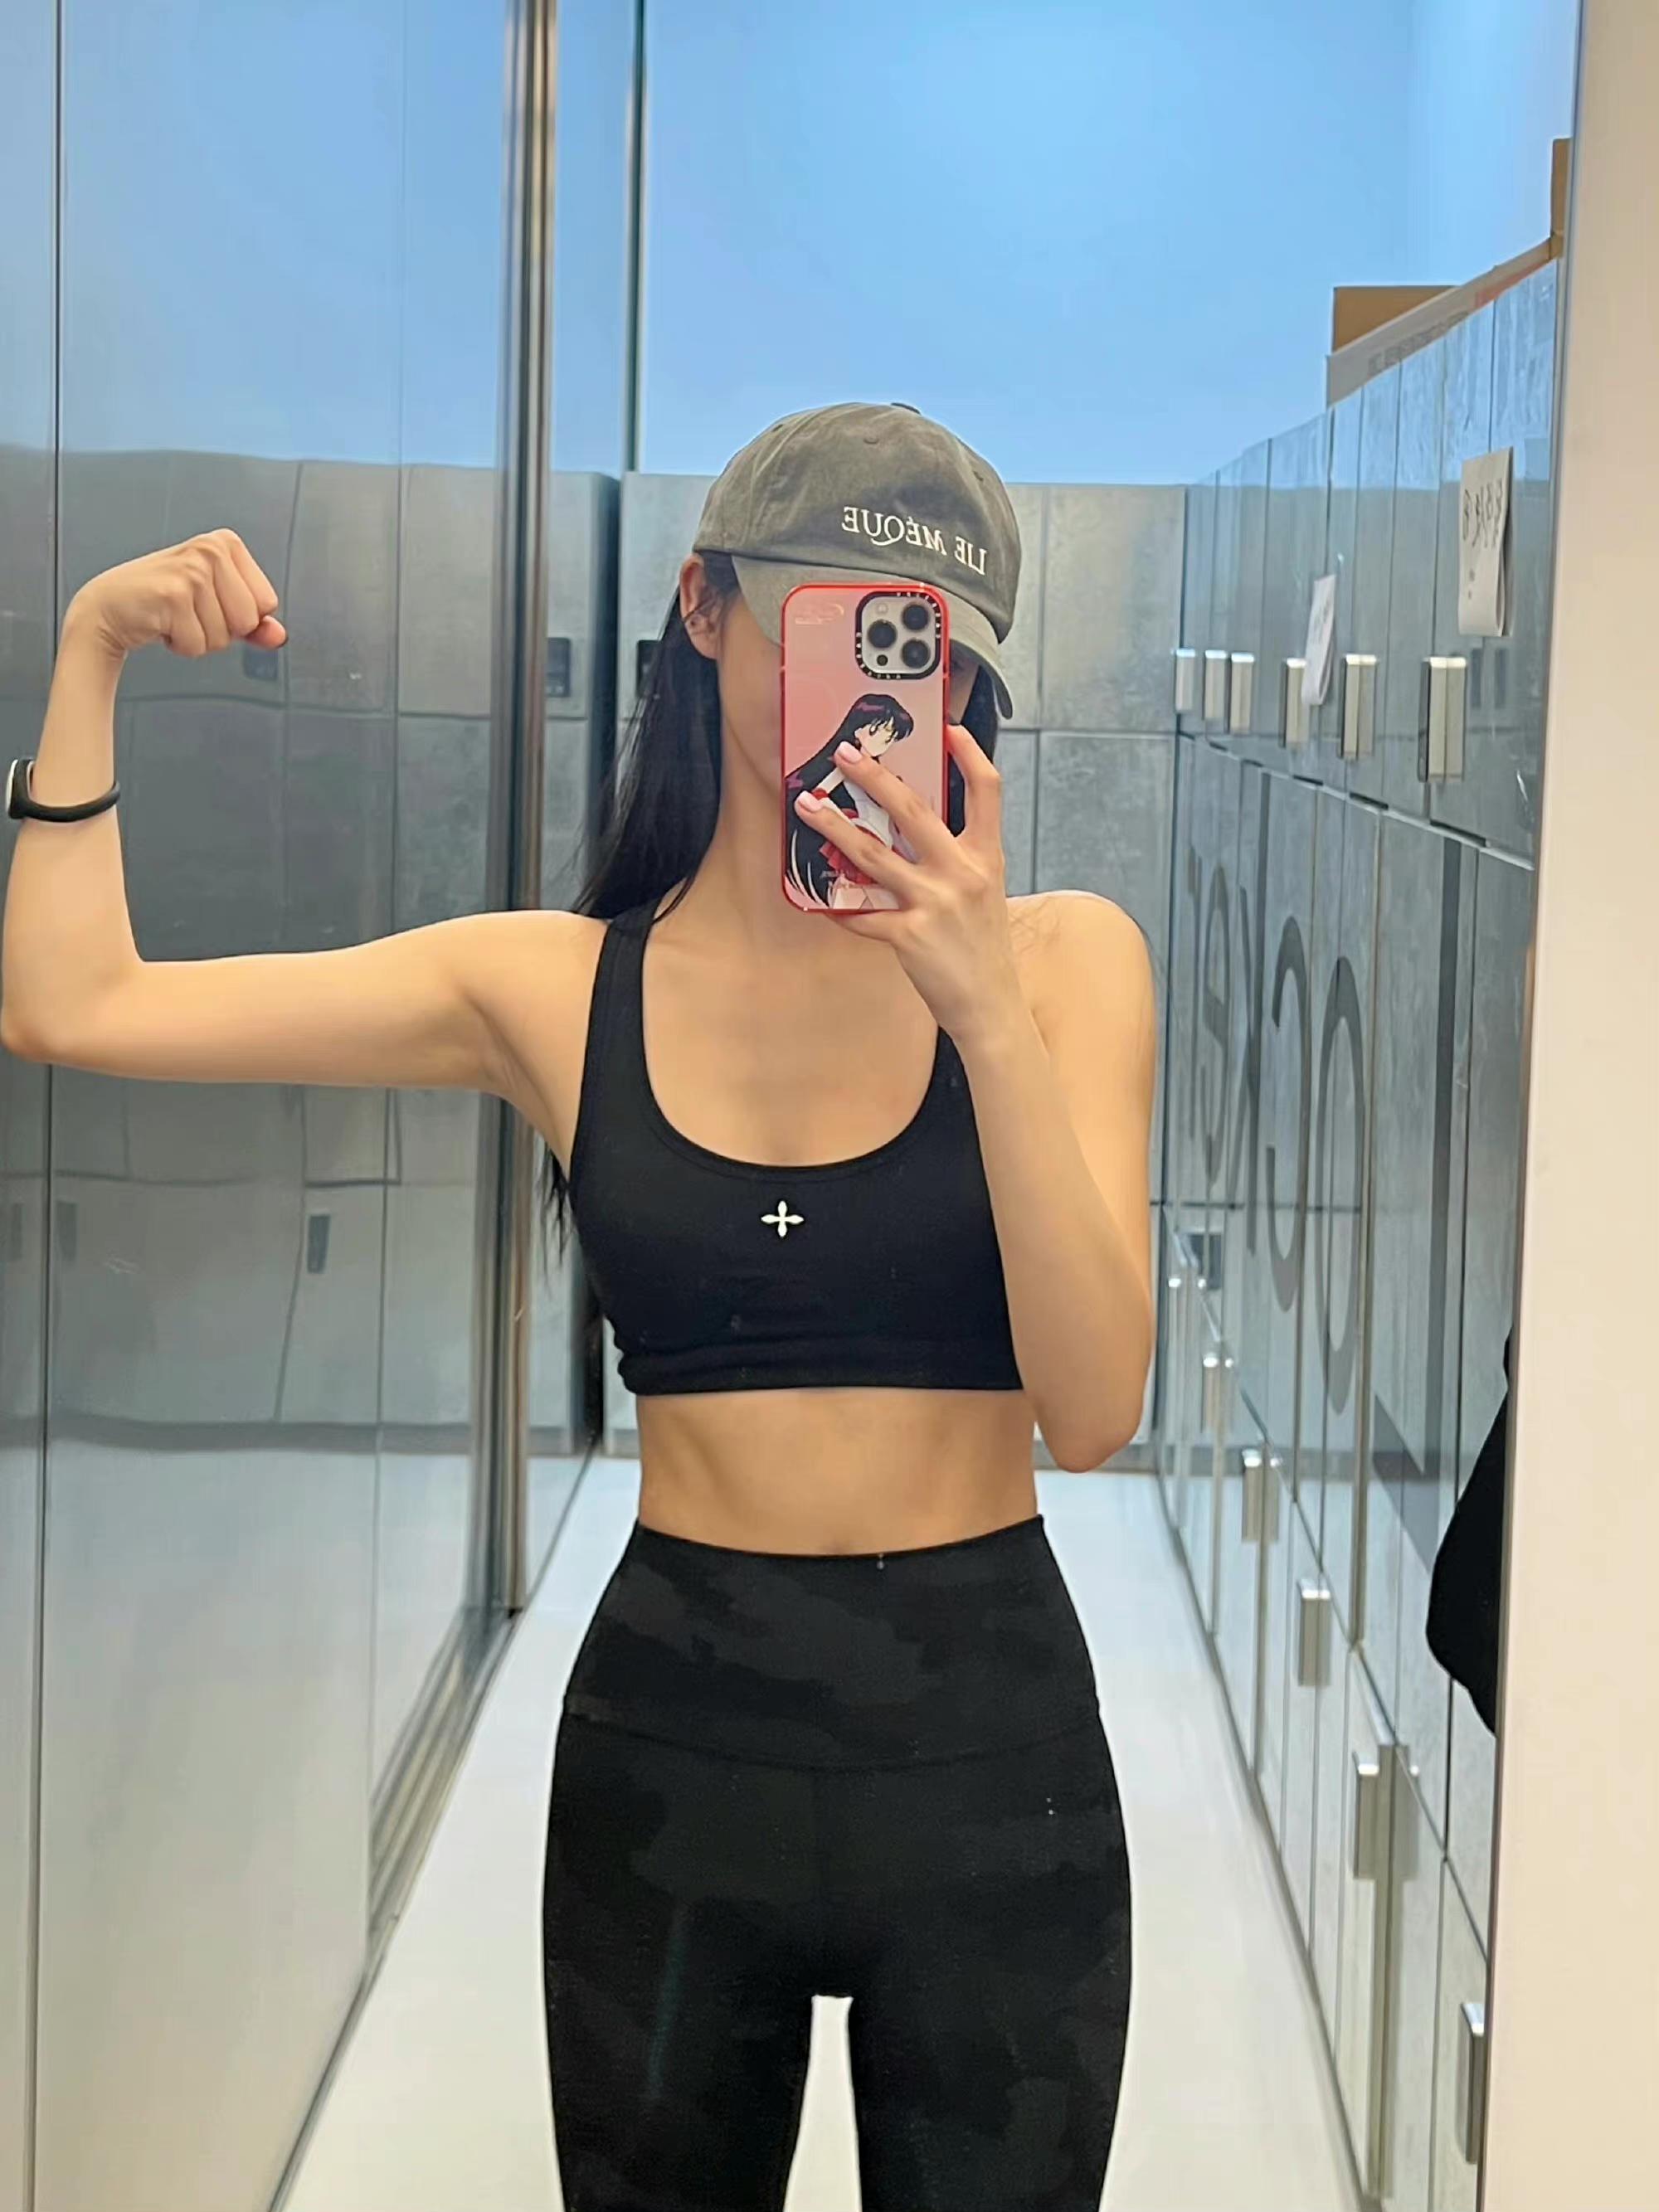 Zhou Jieqiong sweated profusely after exercising, wearing tight pants ...